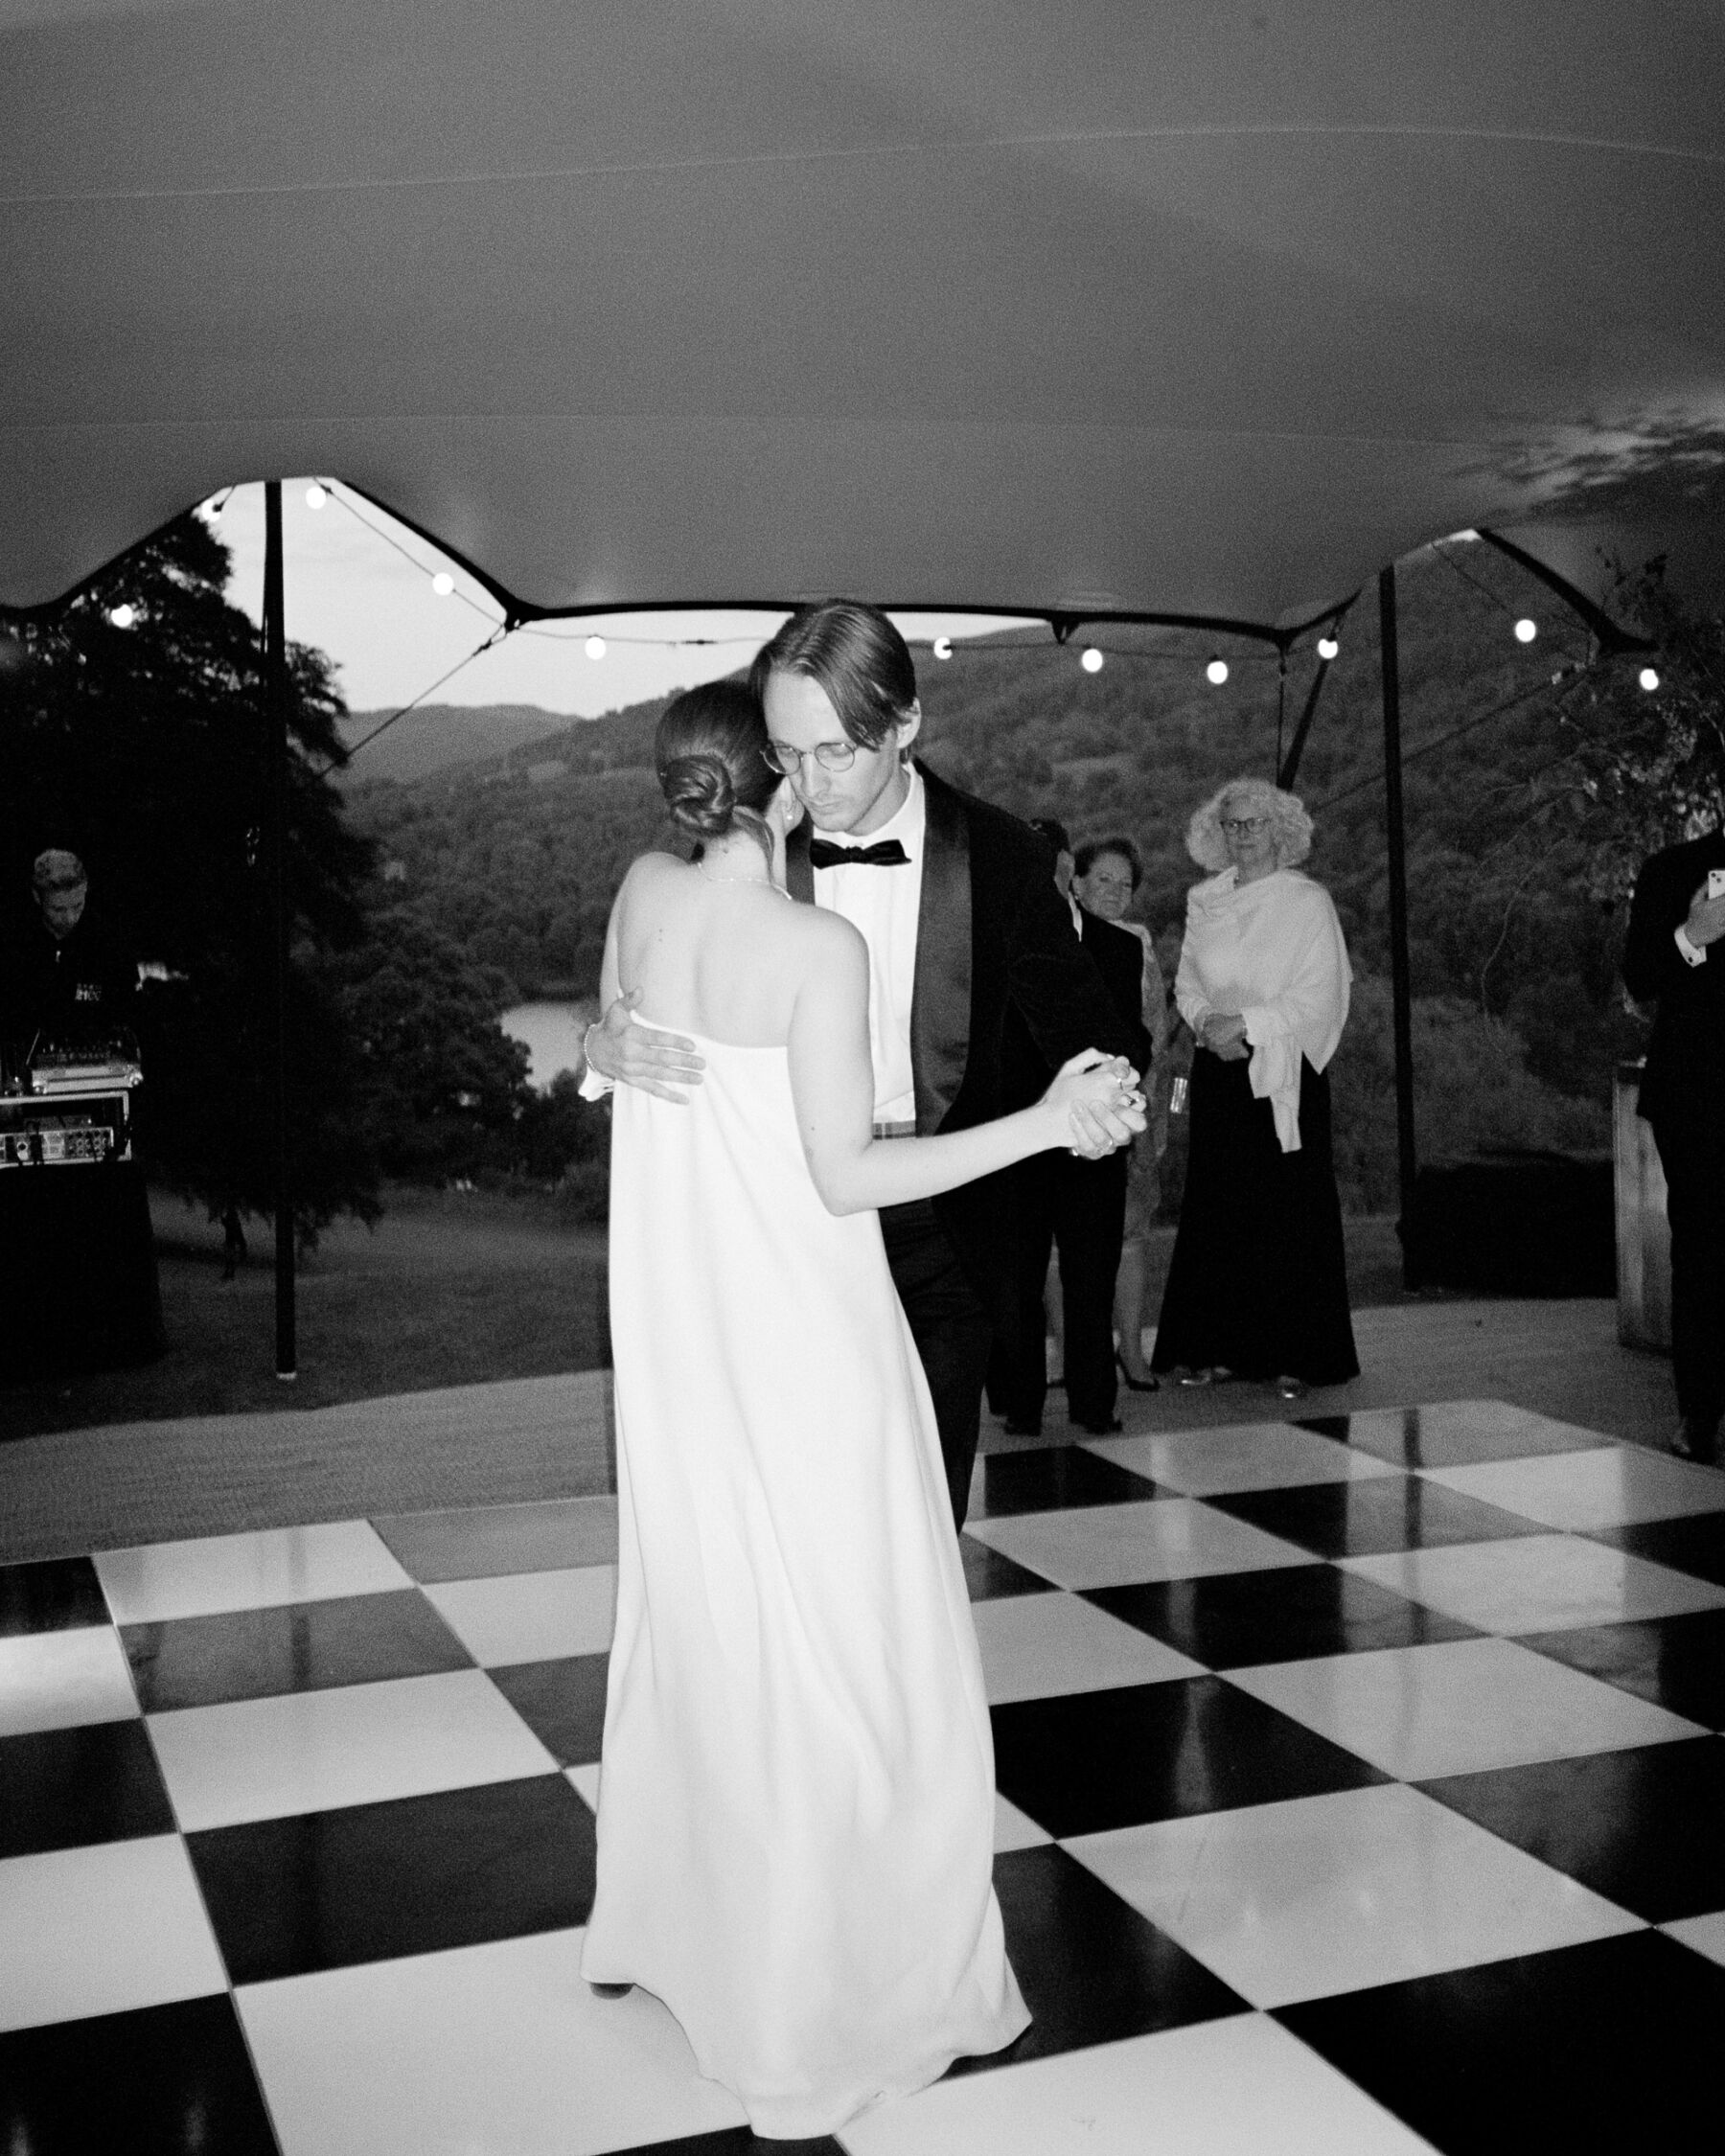 Bride with a low bun, wearing a wedding dress by The Row and dancing in the embrace of her groom. The First Dance.